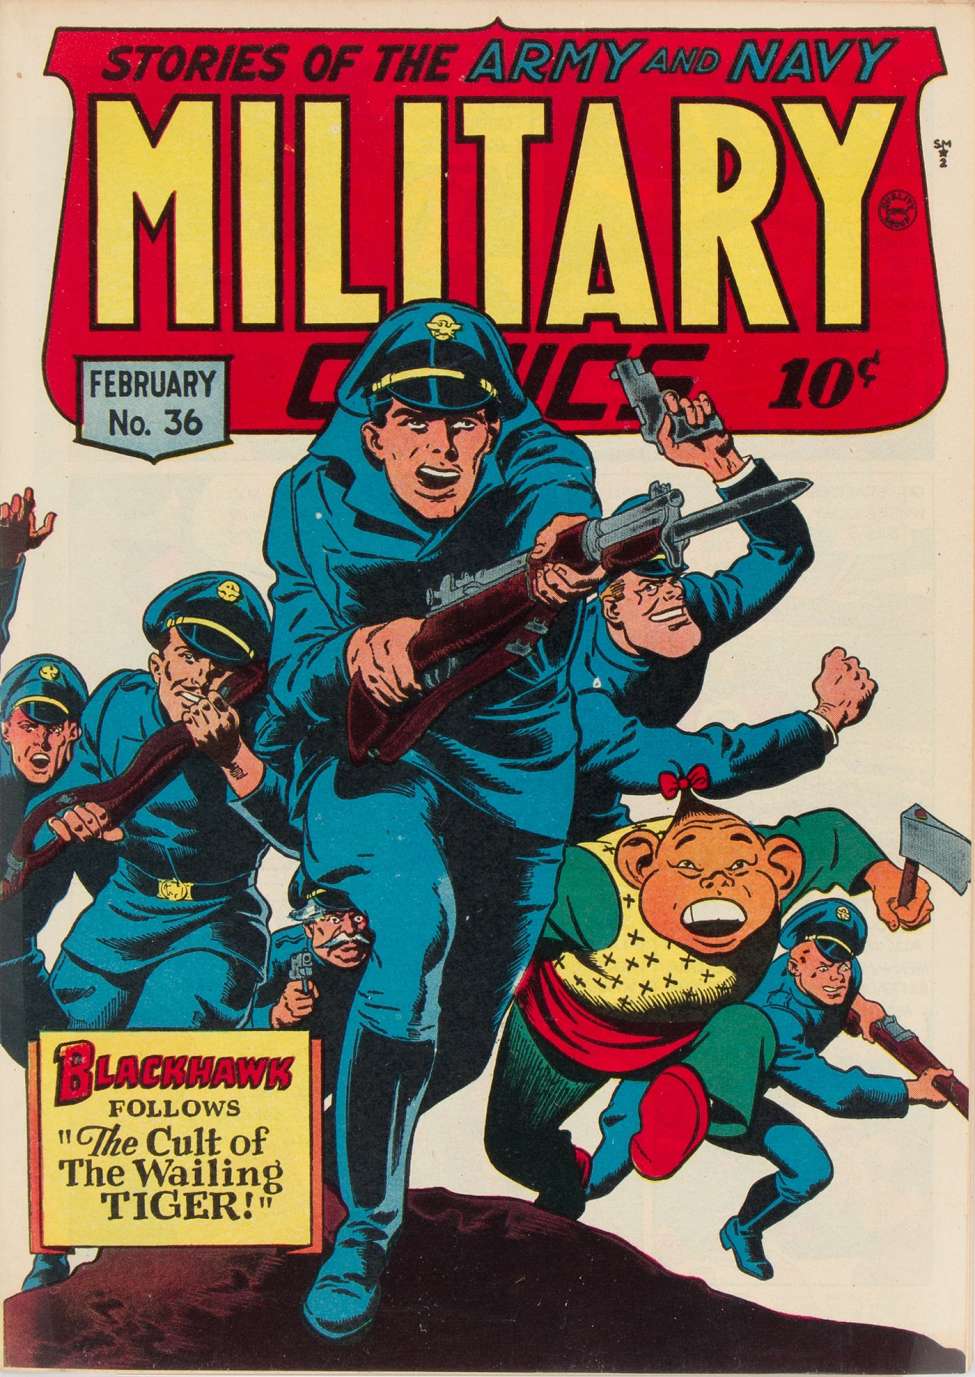 The Complete Military Comics - Pt. 9: Featuring Blackhawk - Issues #25-27  -- All Stories -- No Ads